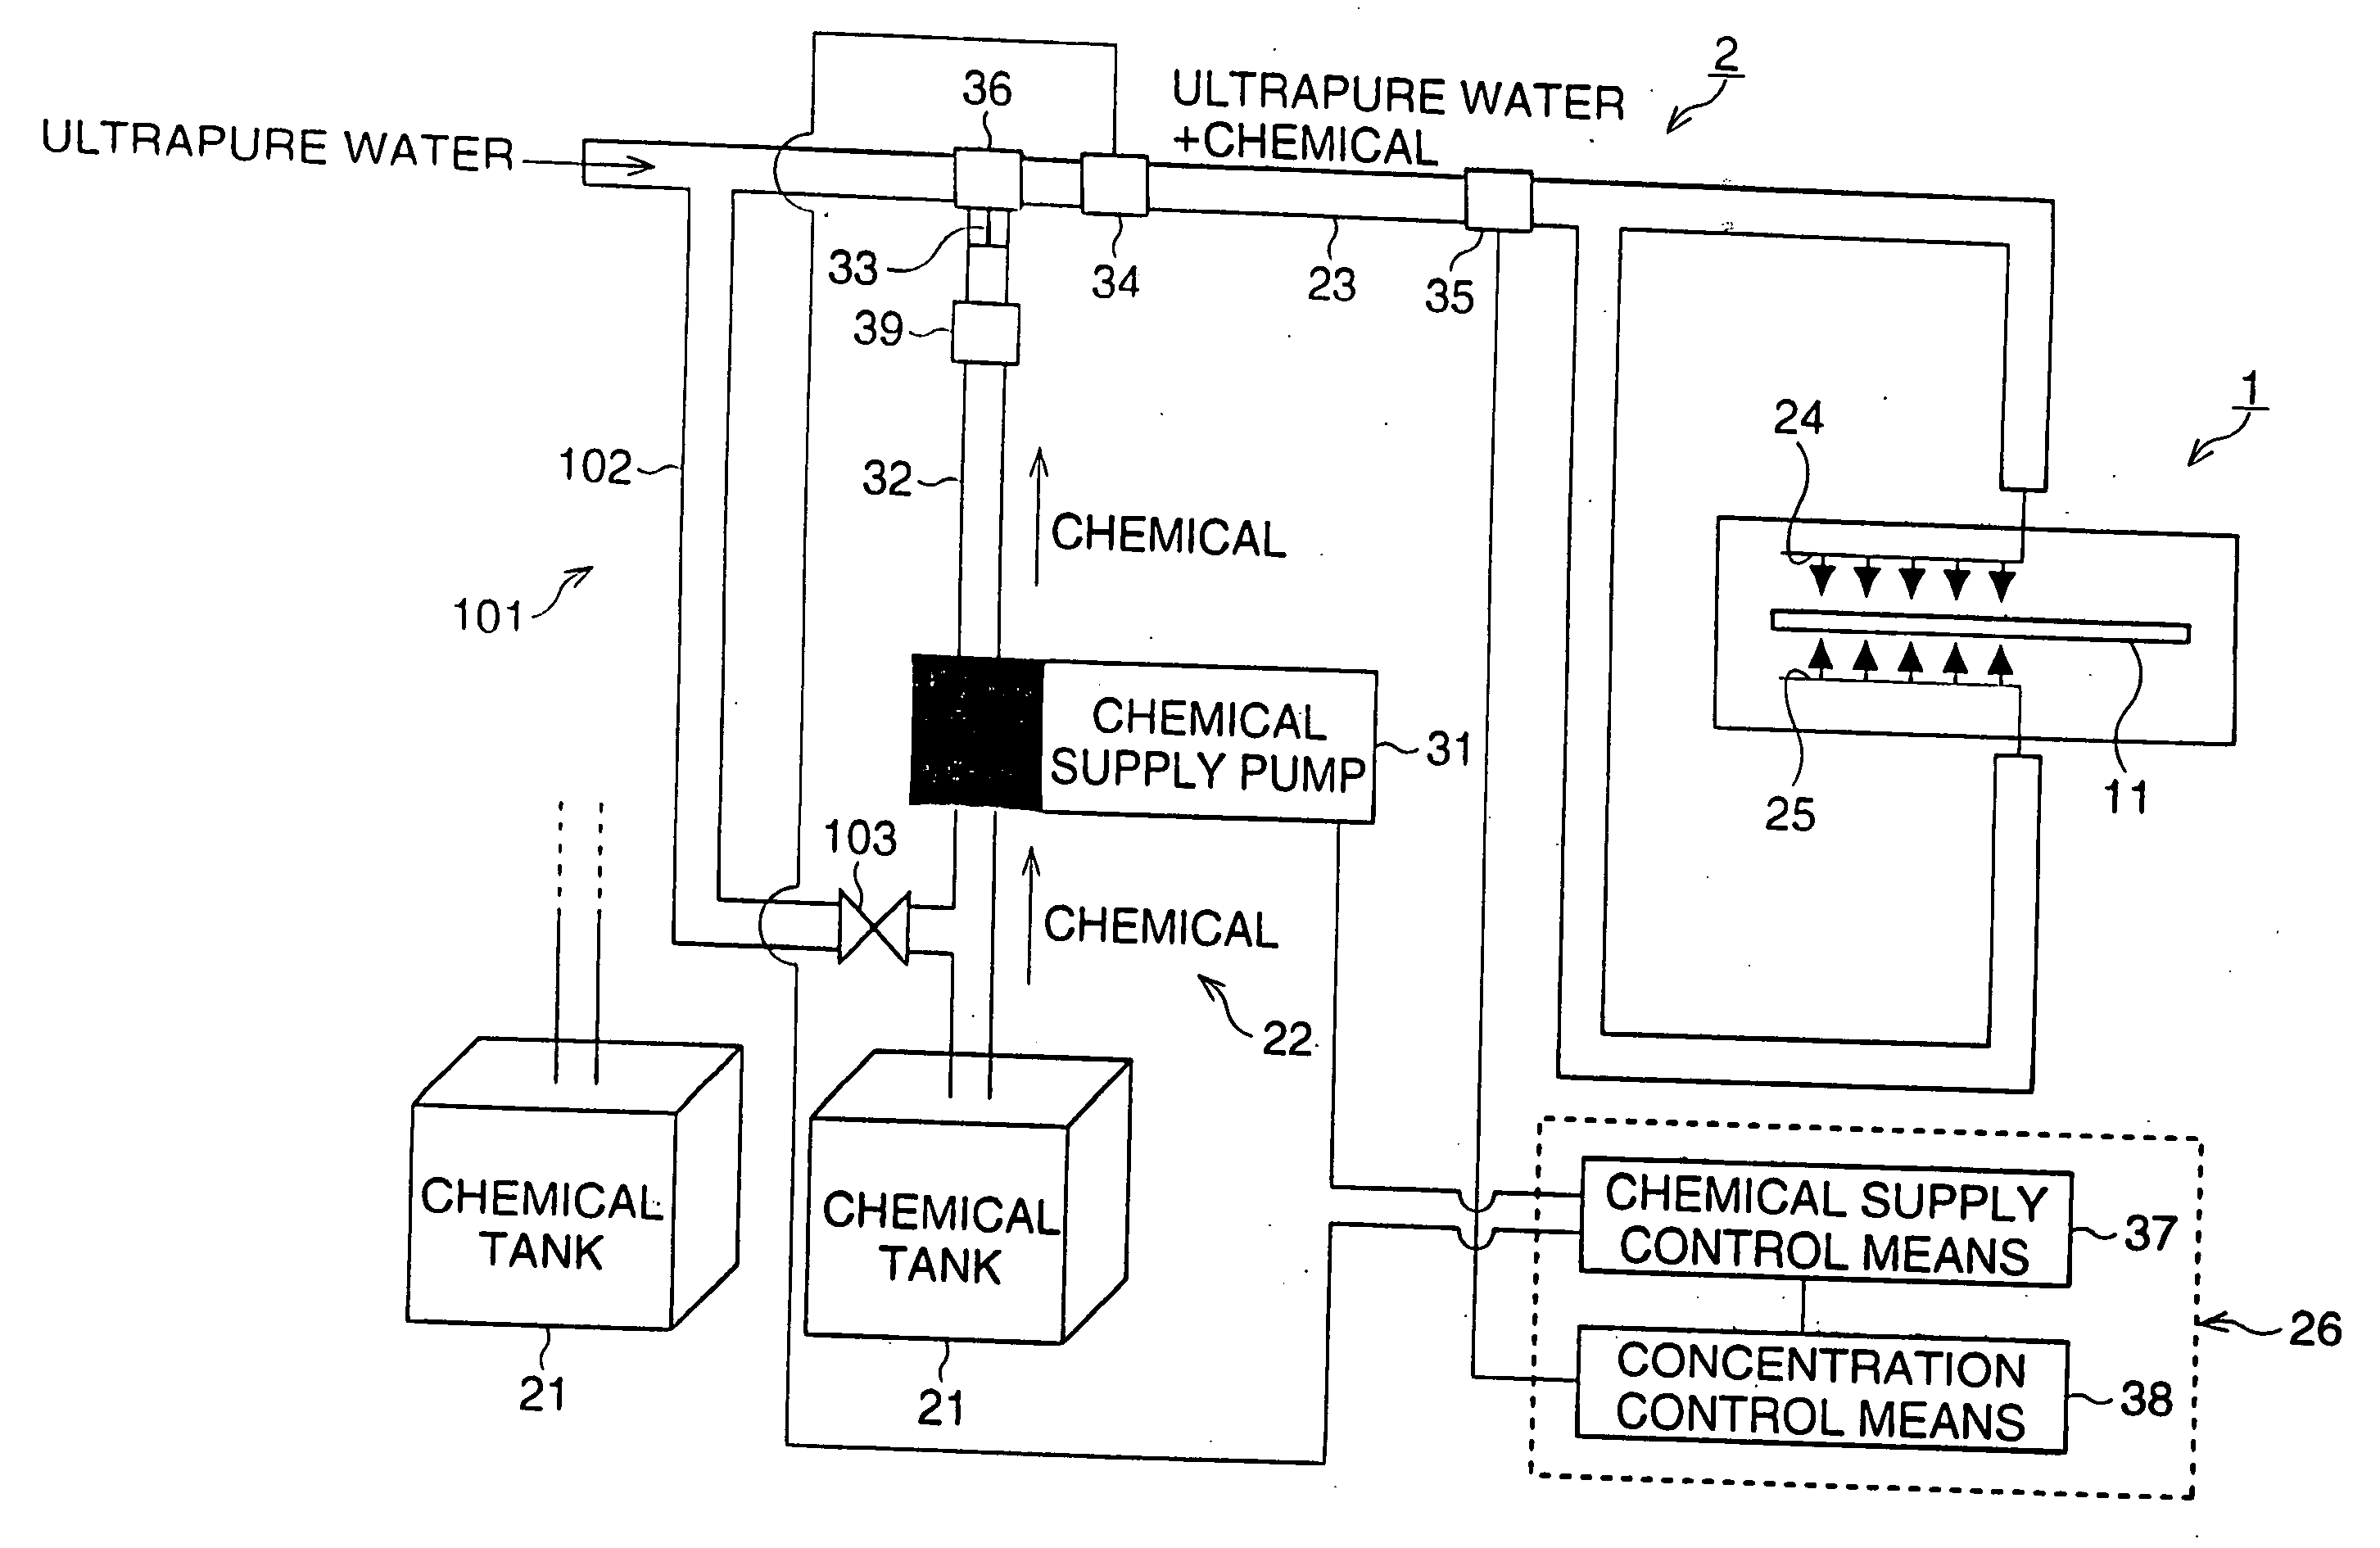 Chemical supply system